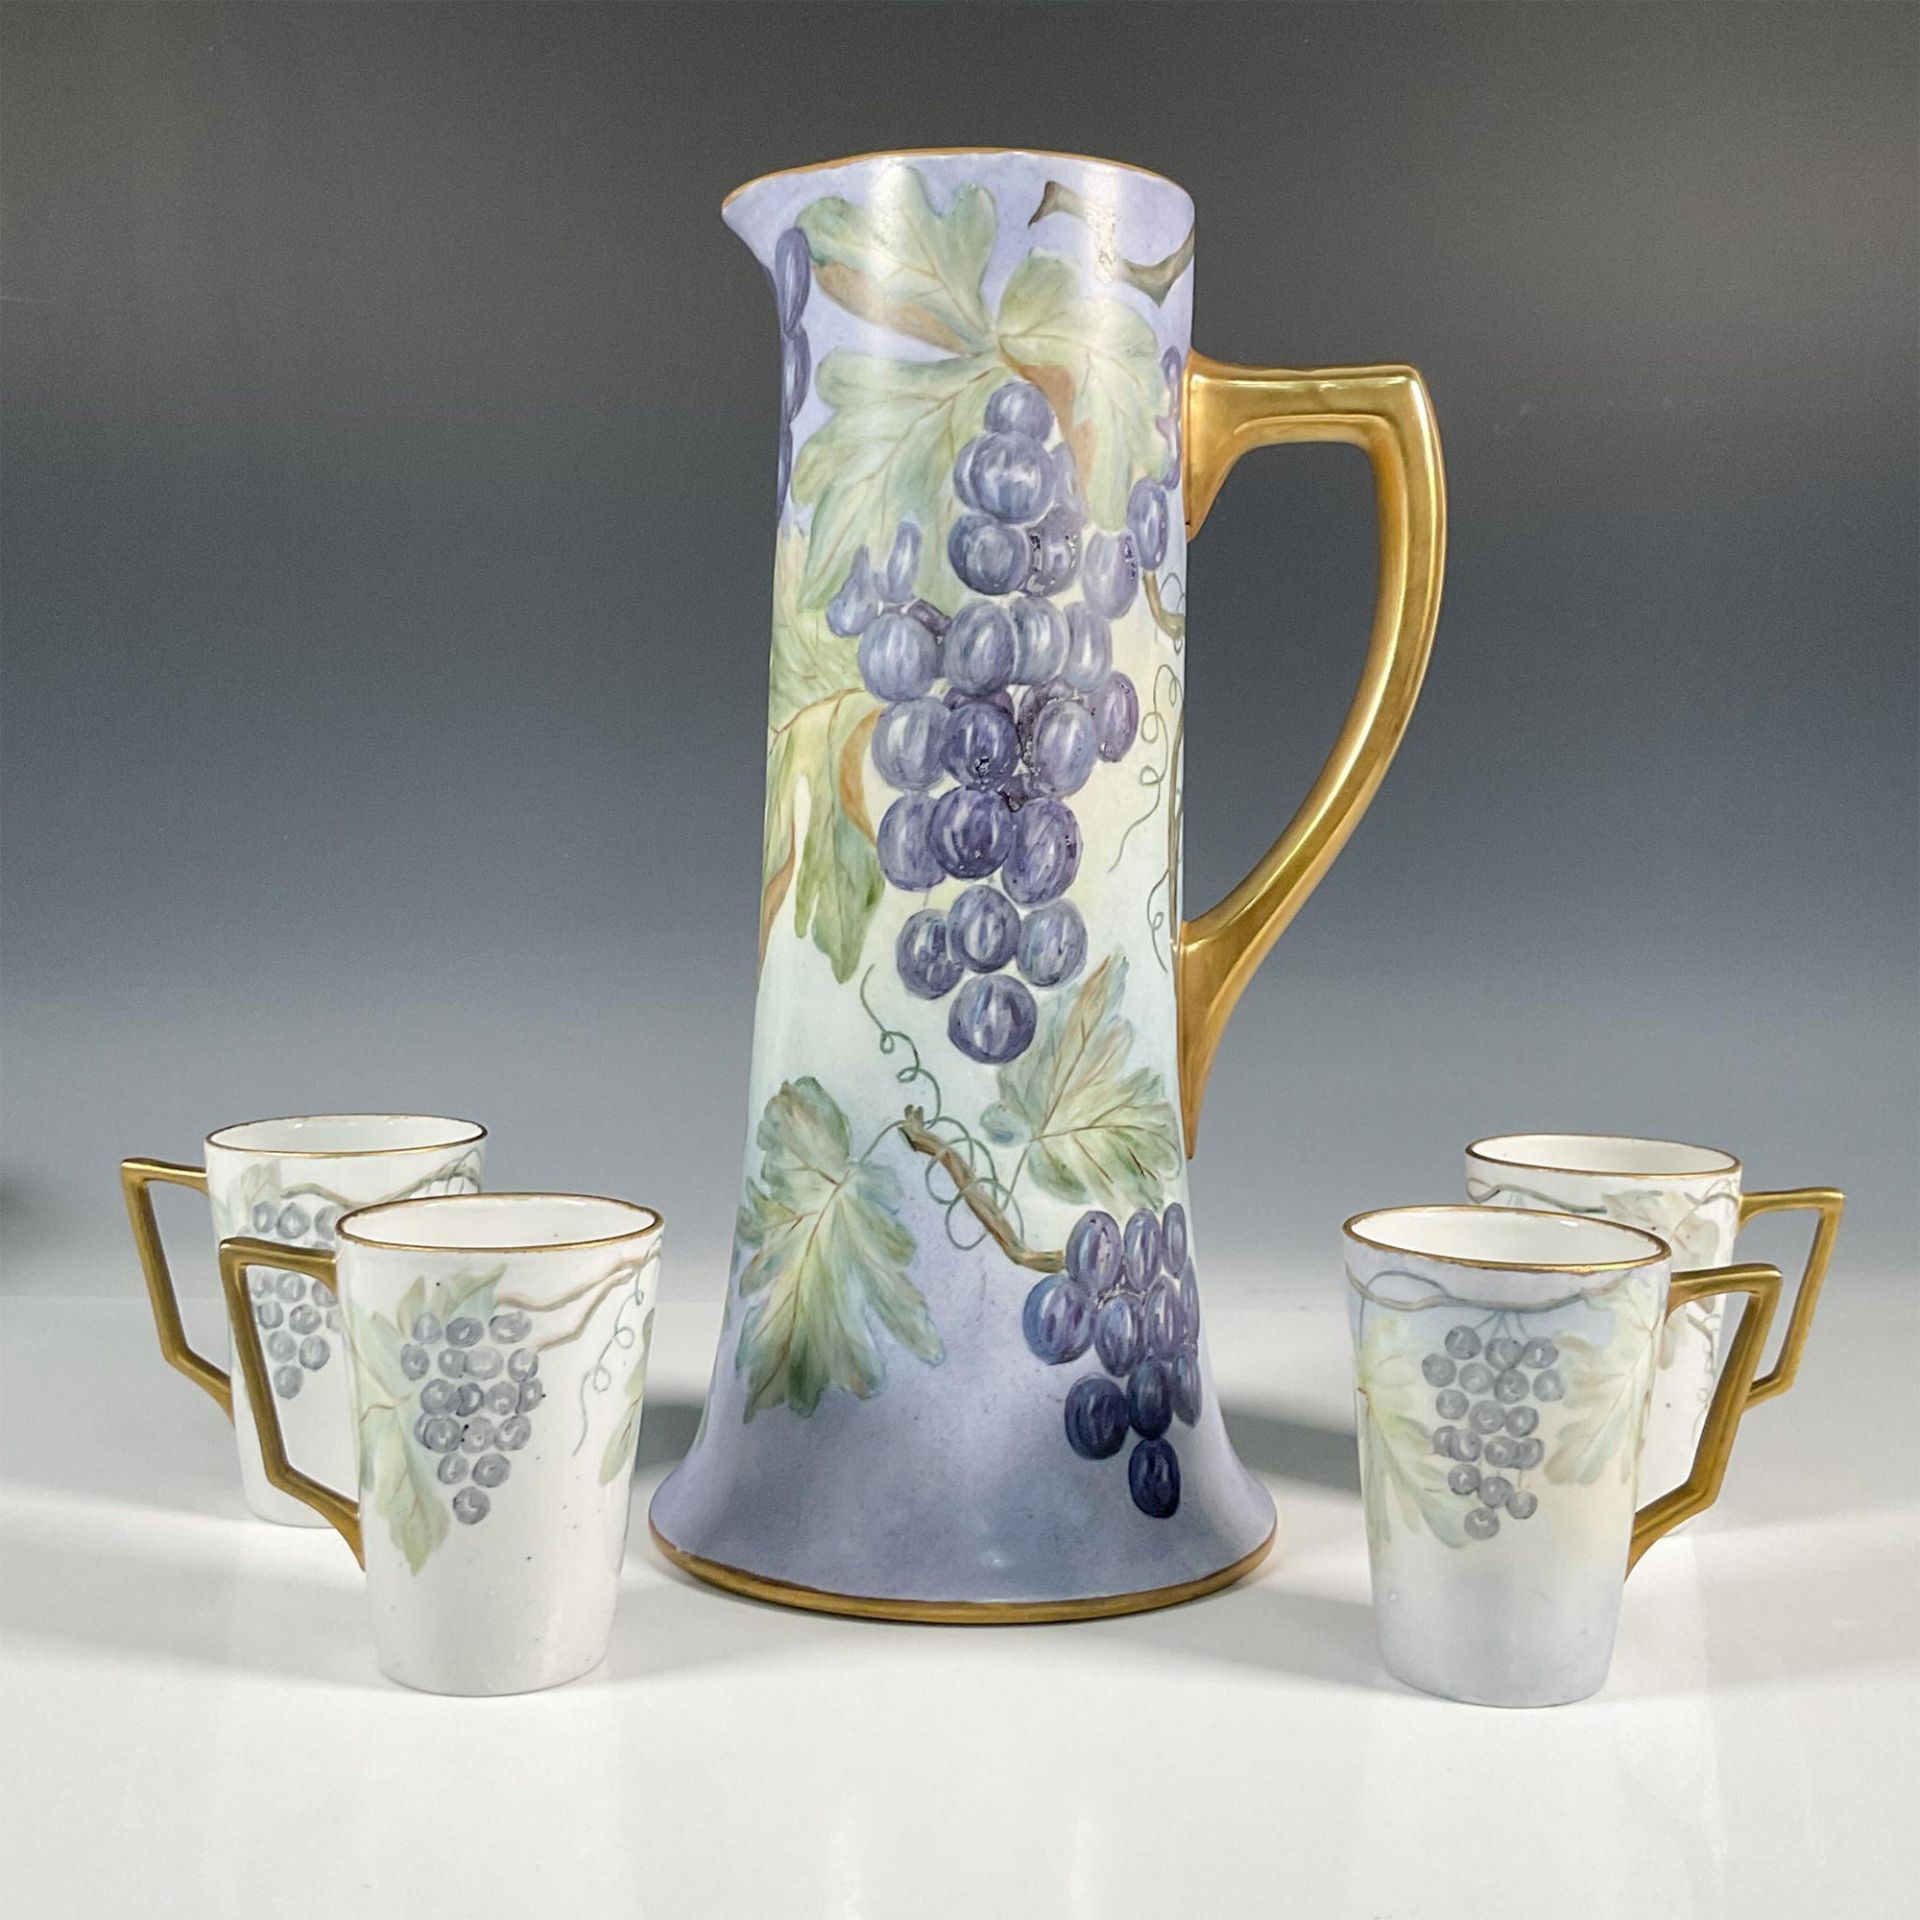 5pc WG & Co. Limoges Porcelain 14" Pitcher + Cups - Image 2 of 2